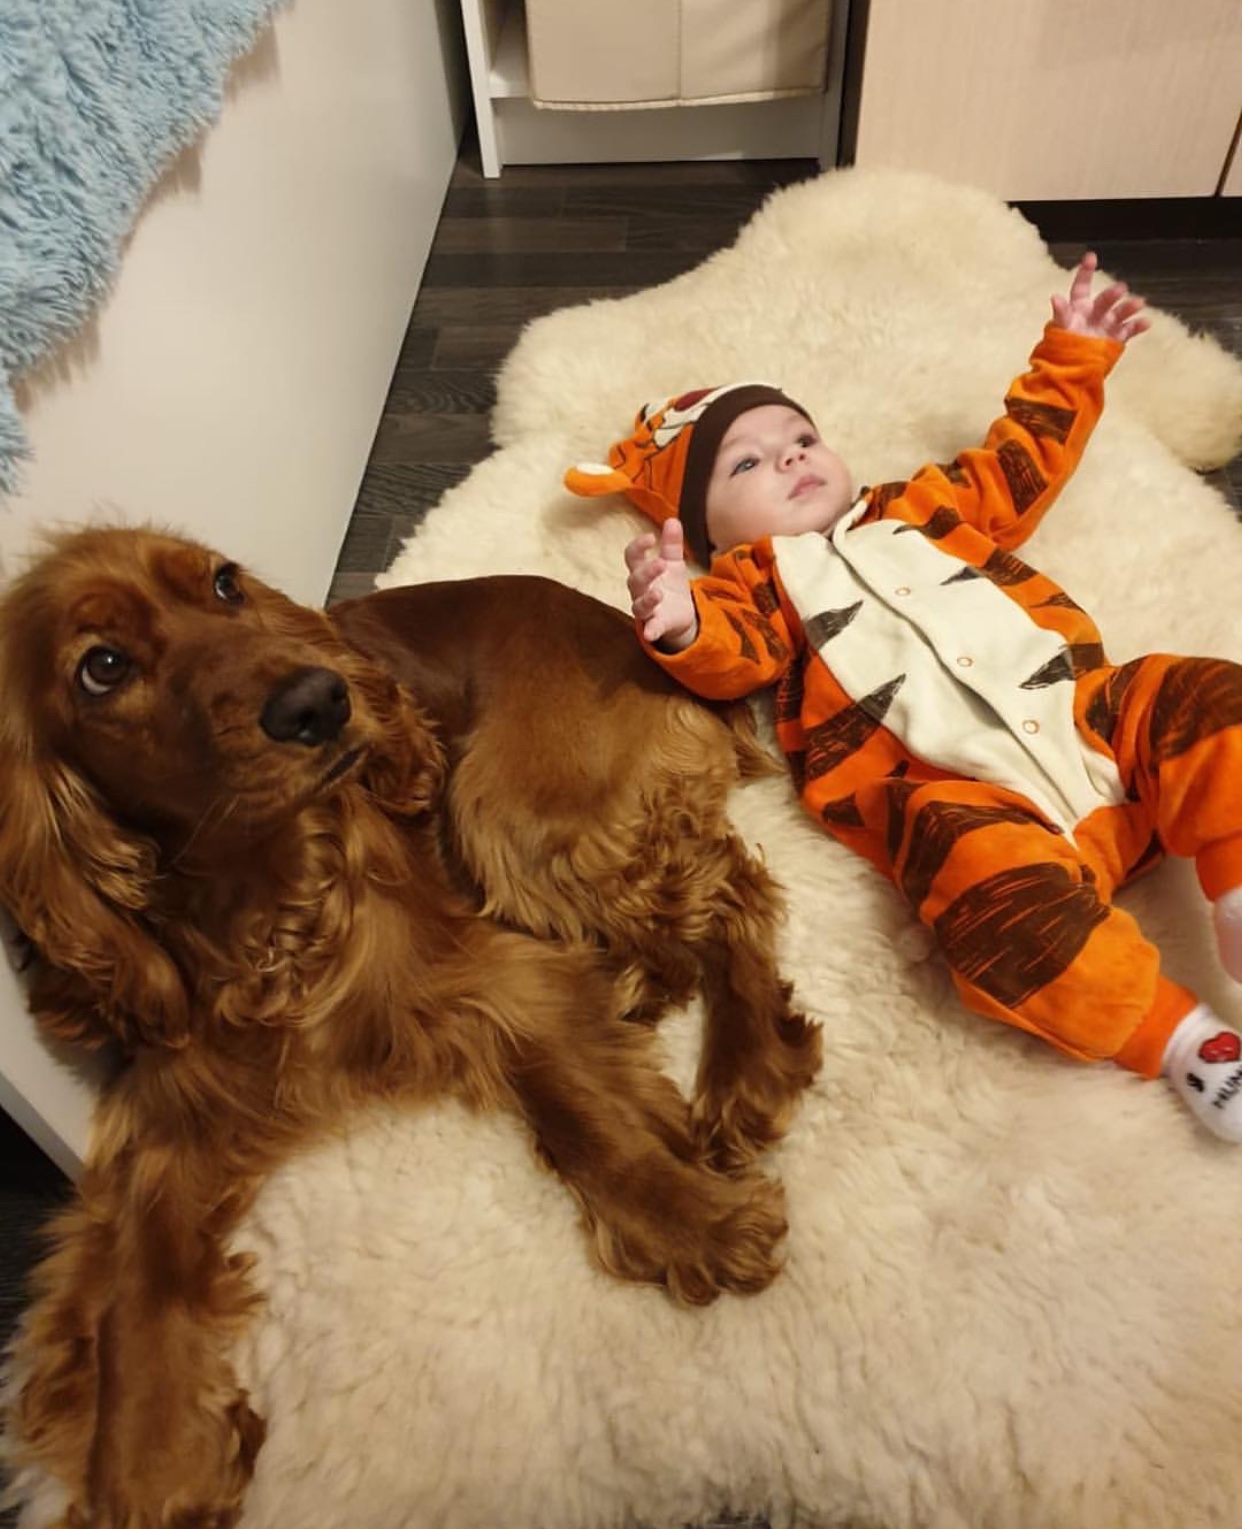 A English Cocker Spaniel lying on the carpet beside a baby wearing tiger costume